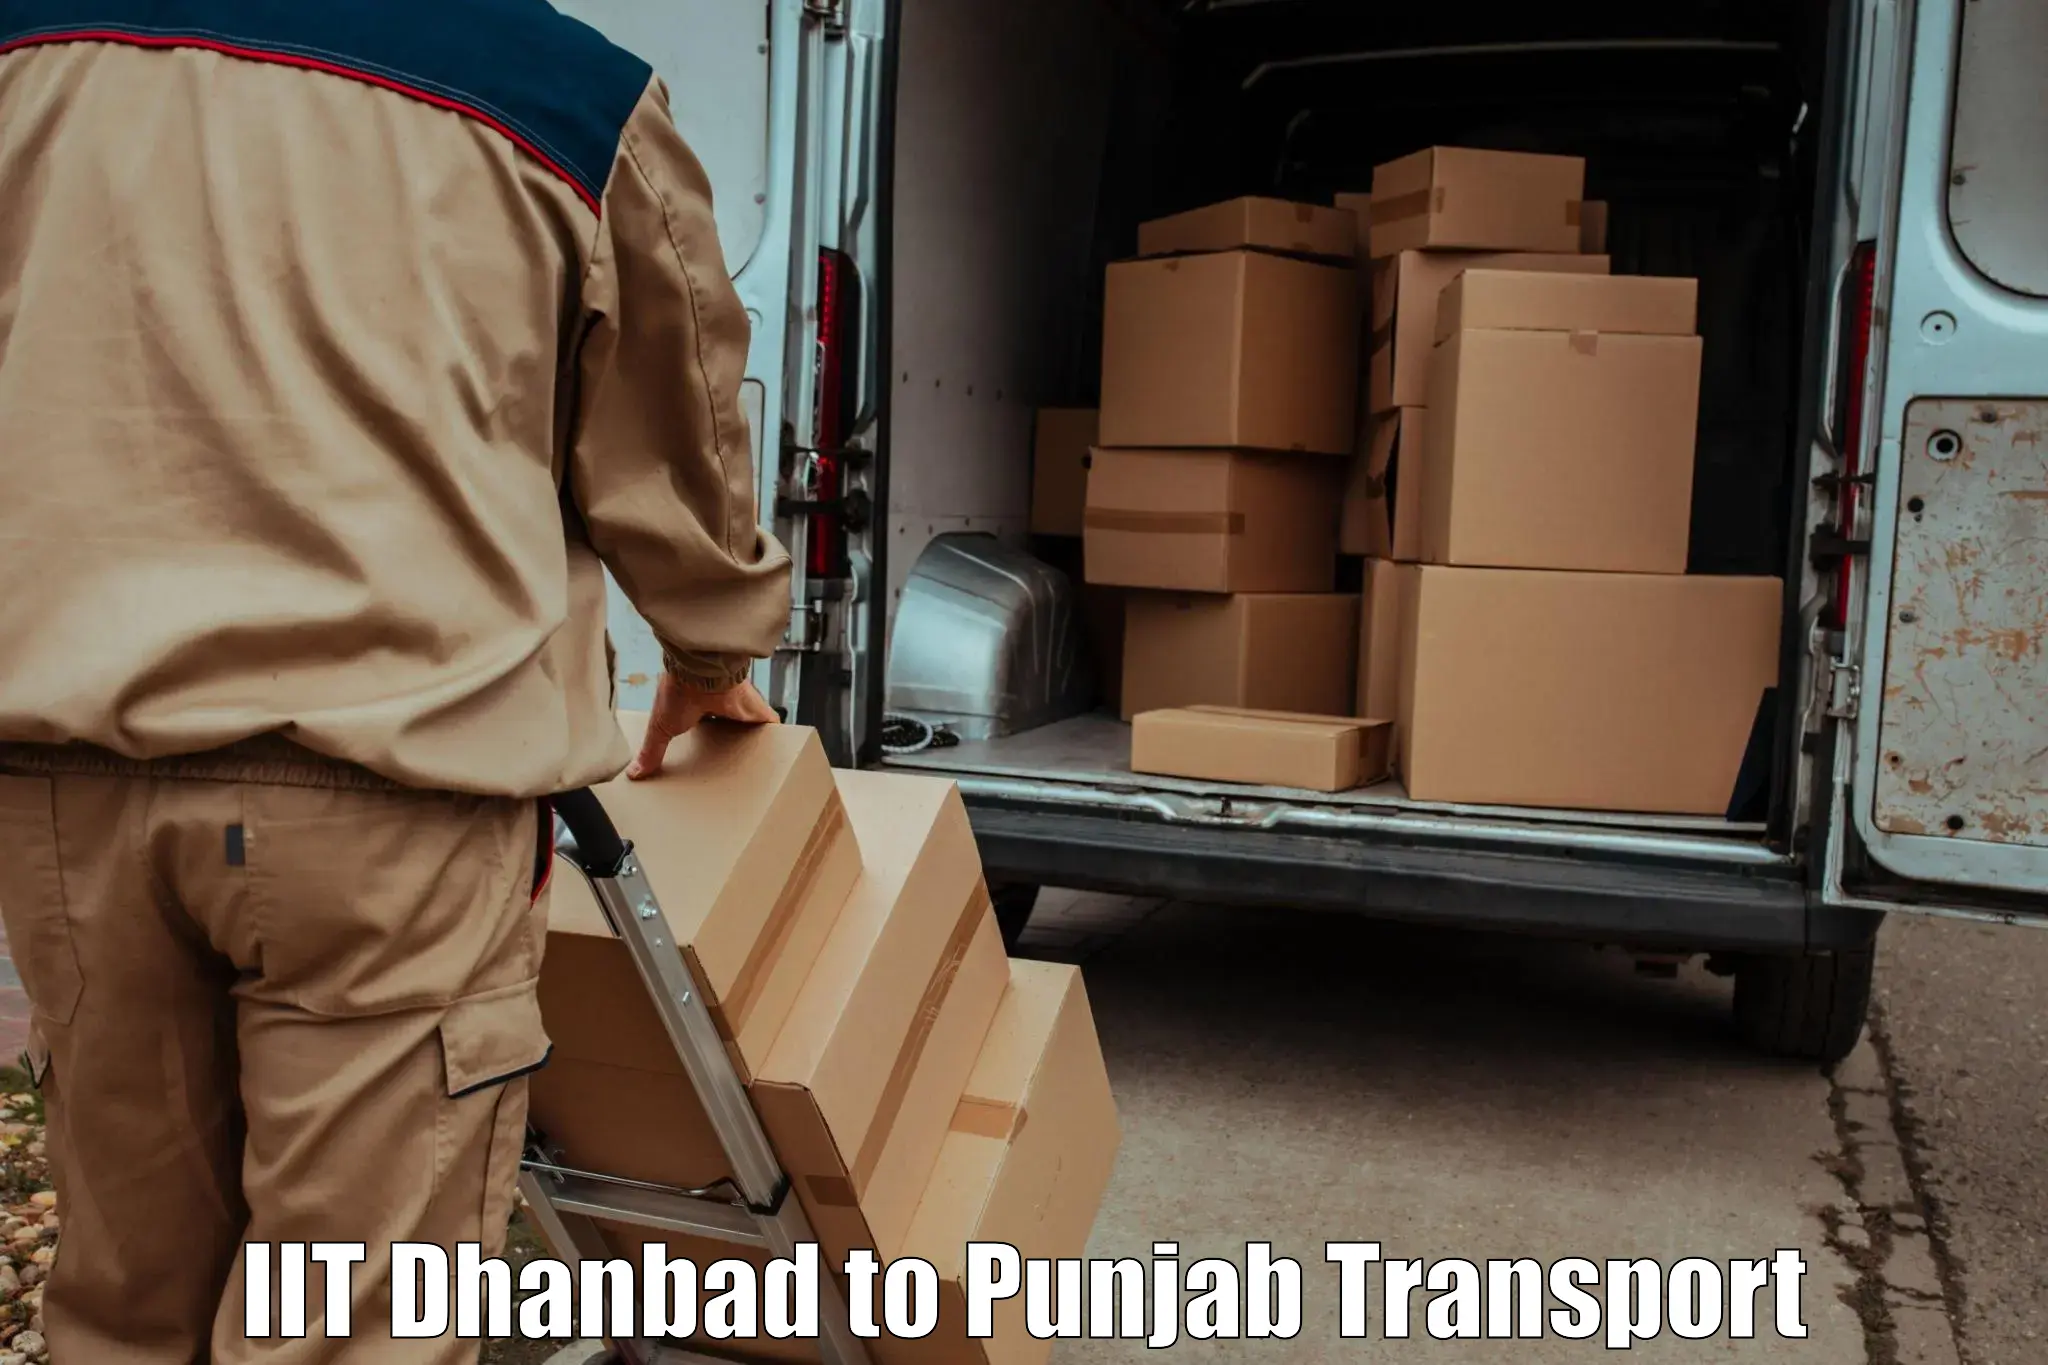 Online transport service IIT Dhanbad to Sultanpur Lodhi